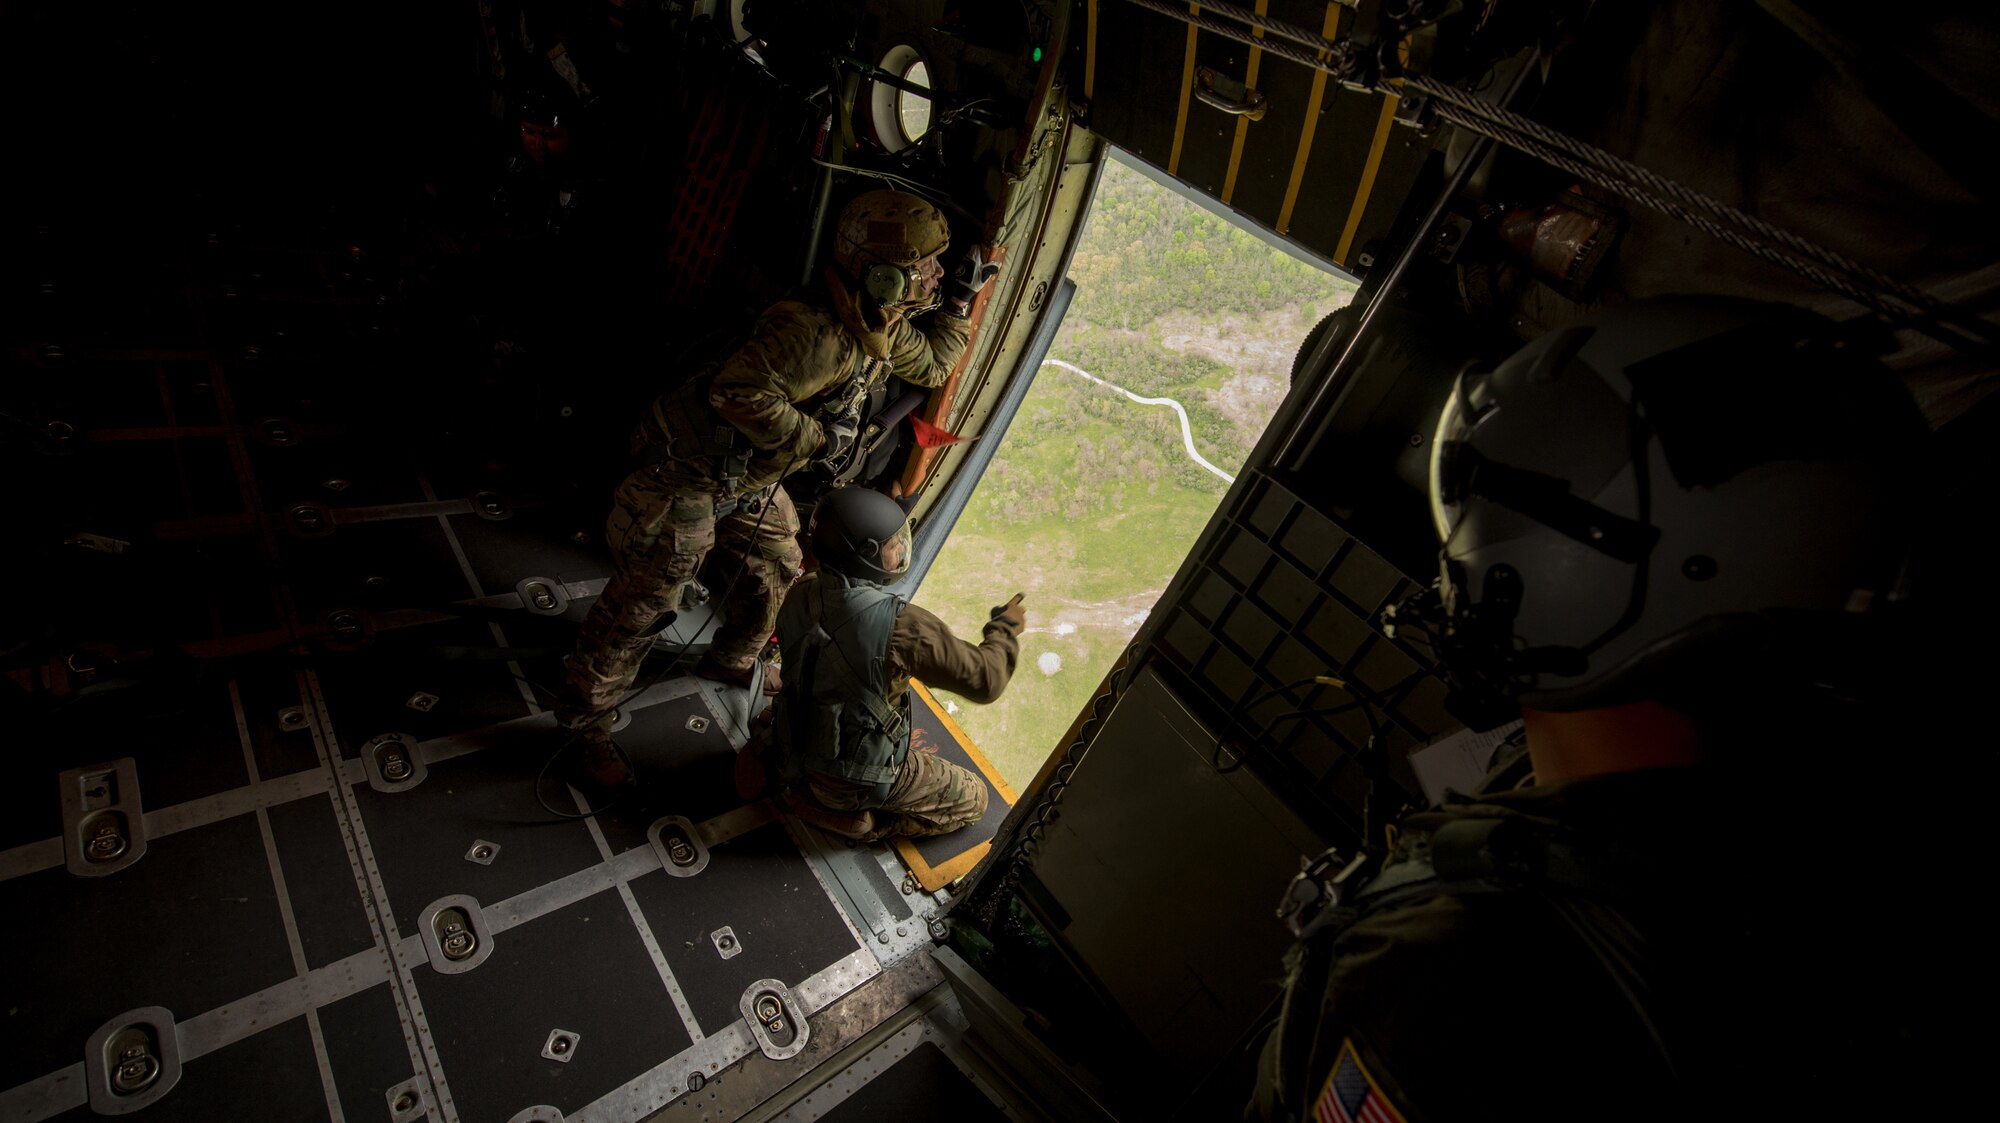 Pararescuemen and combat controllers from the Kentucky Air National Guard’s 123rd Special Tactics Squadron prepare for a jump from a 123rd Airlift Wing C-130 Hercules during the Precision Jumpmaster Course held at Camp Atterbury, Ind., May 13, 2020. The course is an upgrade training class for students who have attended formal jumpmaster training before. (U.S. Air National Guard photo by Phil Speck)